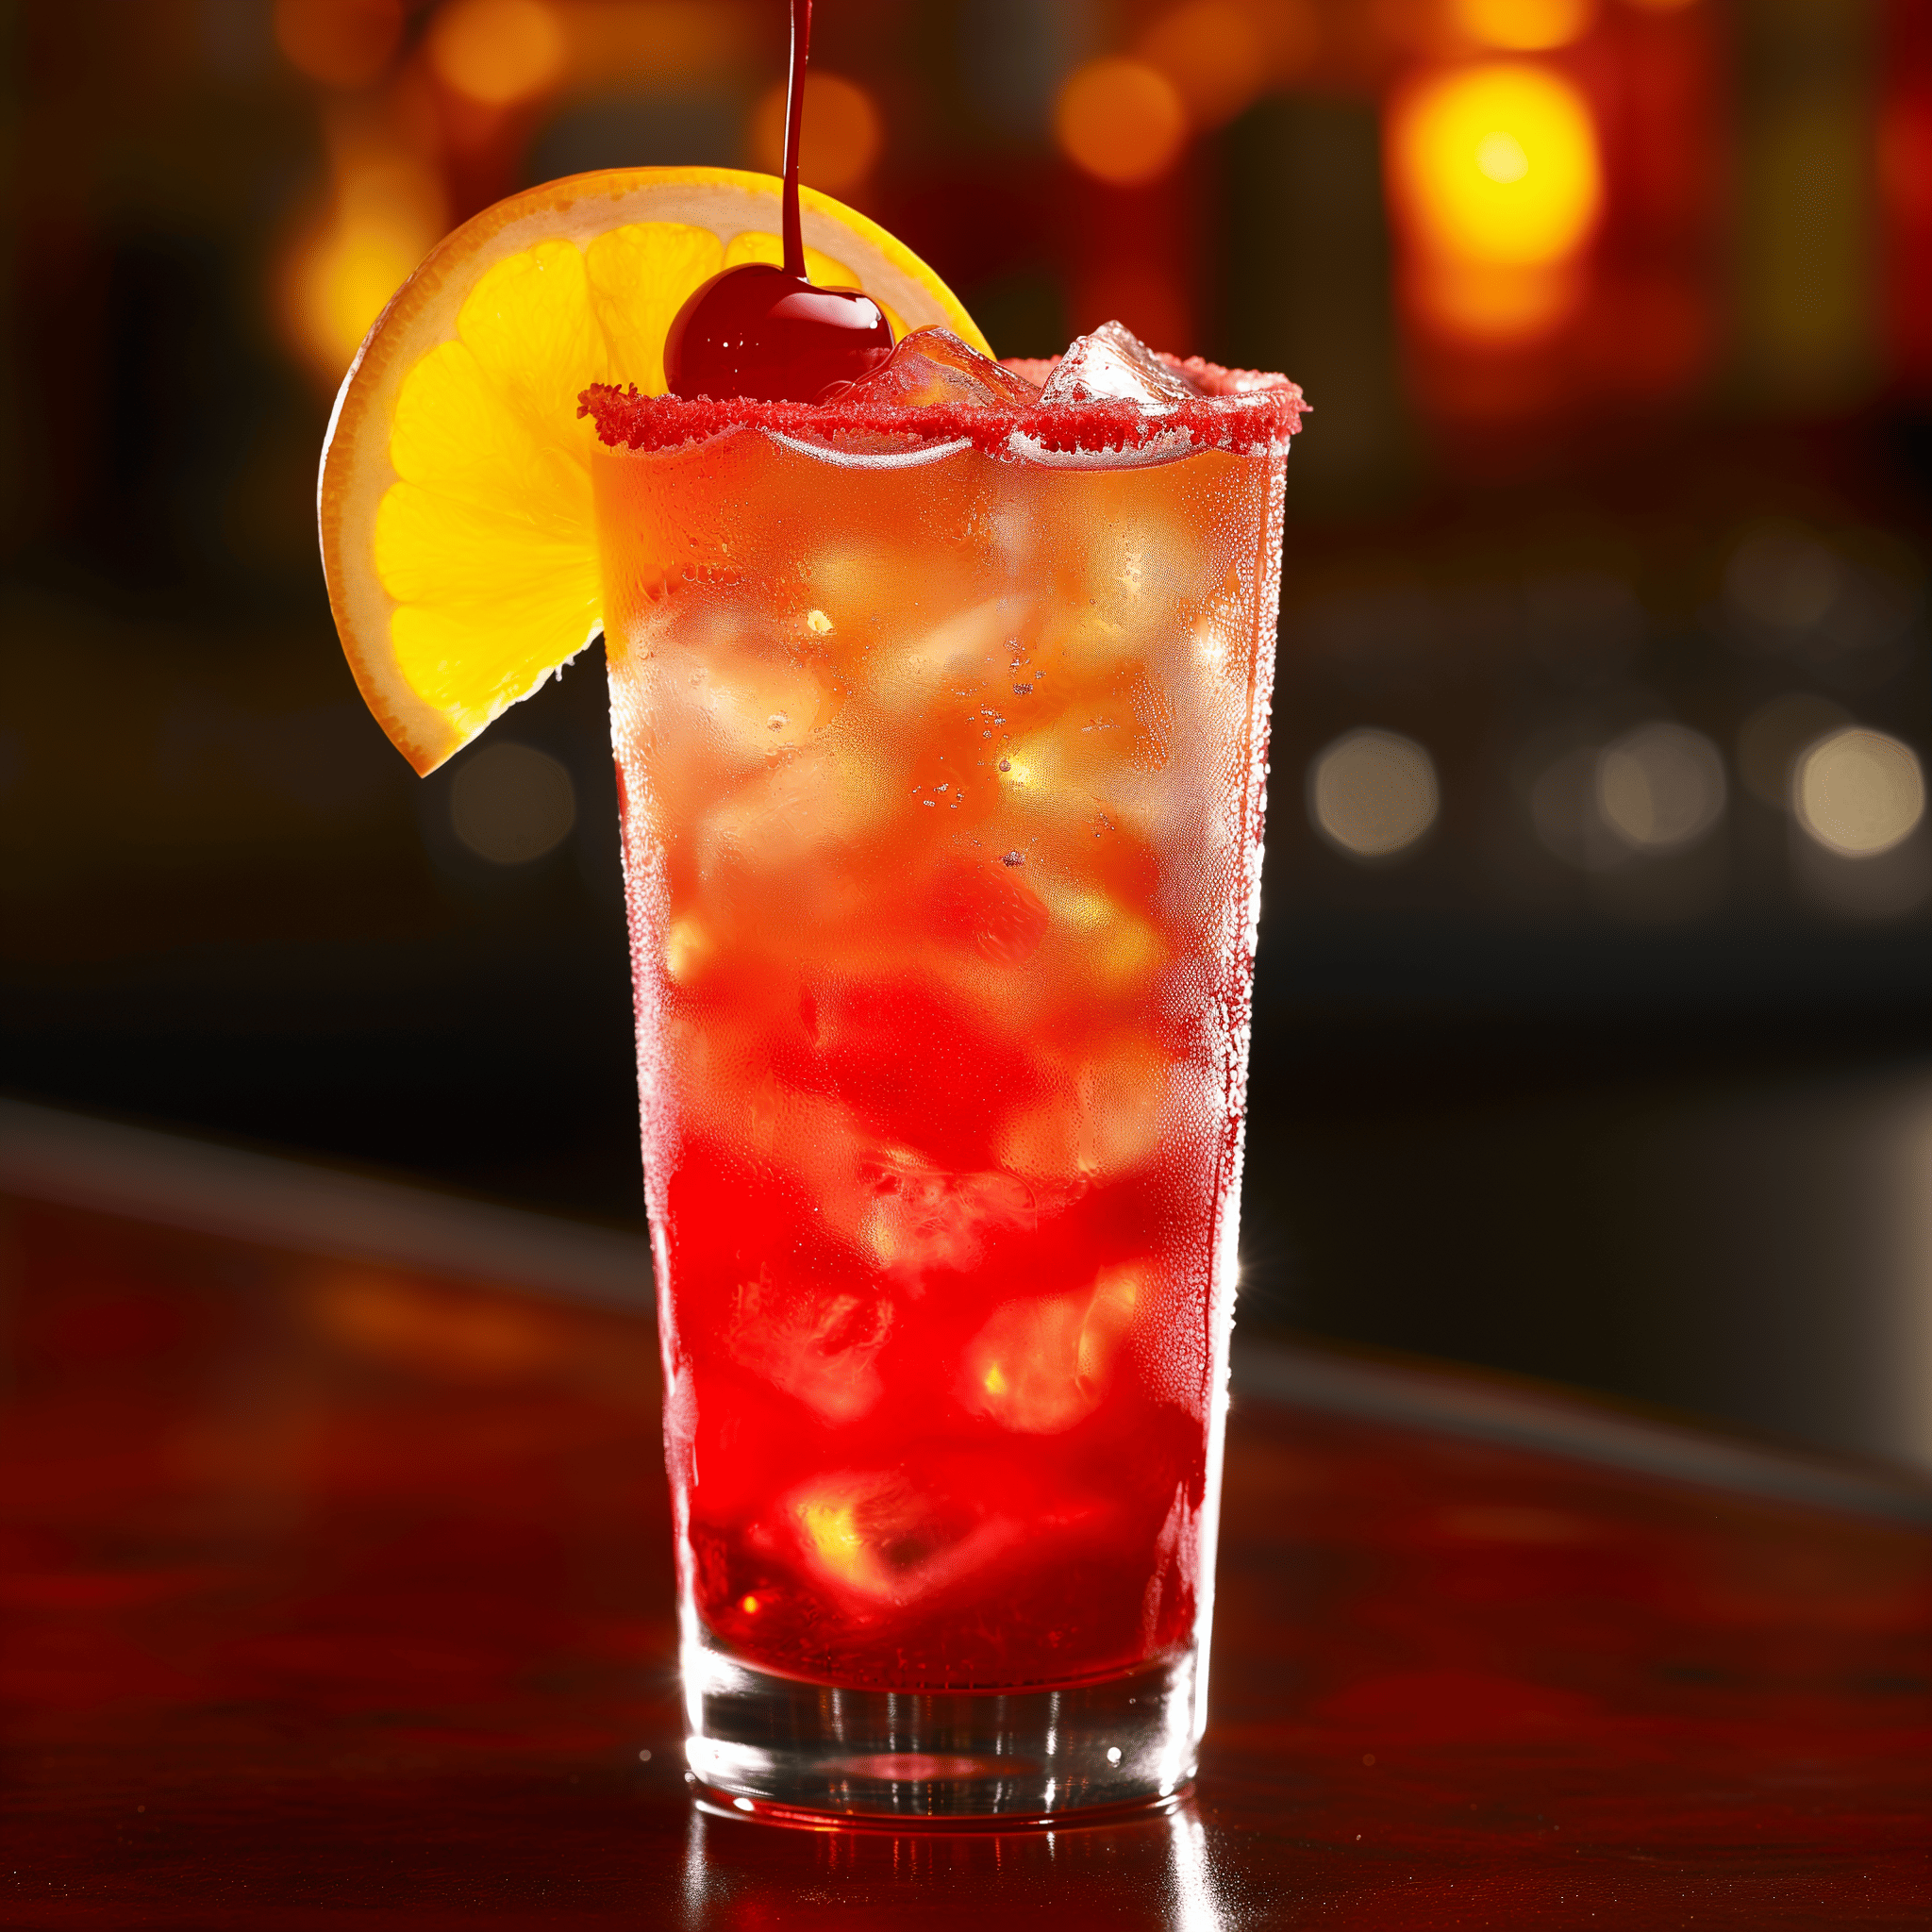 Fireman's Sour Cocktail Recipe - The Fireman's Sour offers a tantalizing balance of sweet grenadine and tart lime juice, complemented by the smoothness of light rum. The effervescence of club soda adds a refreshing fizz to the drink.